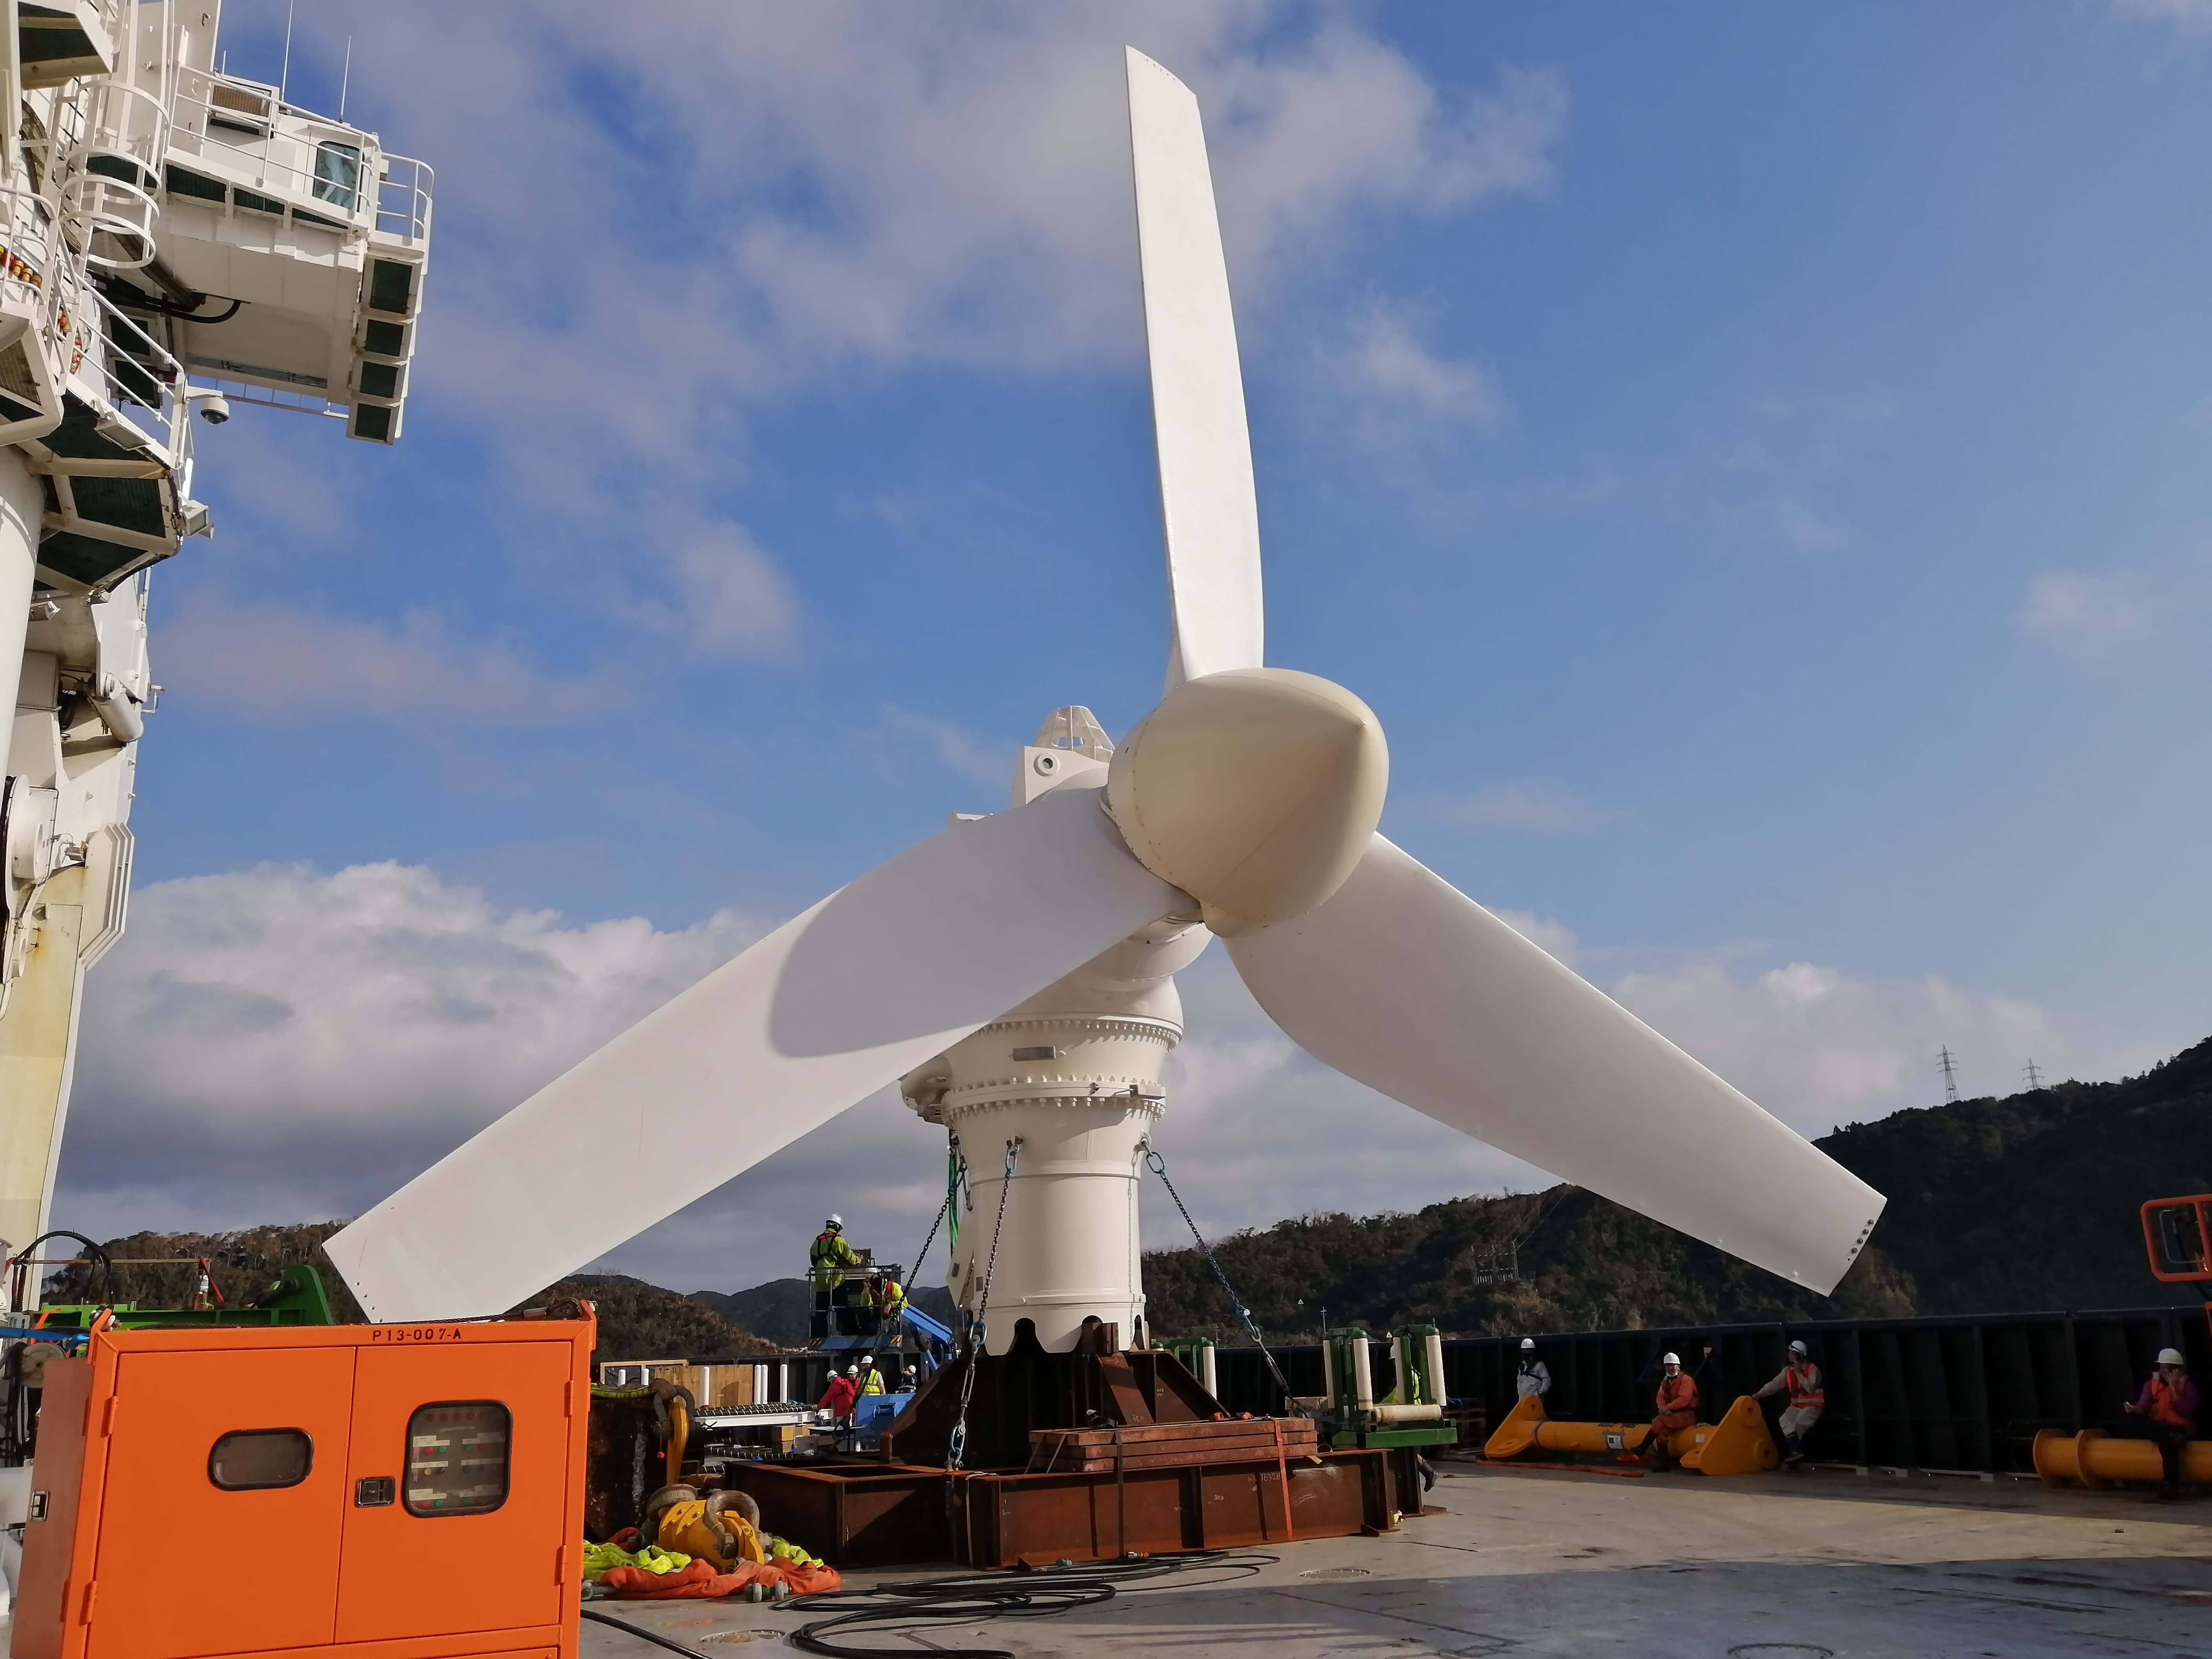 A tidal turbine built in Scotland now delivers power in Japan